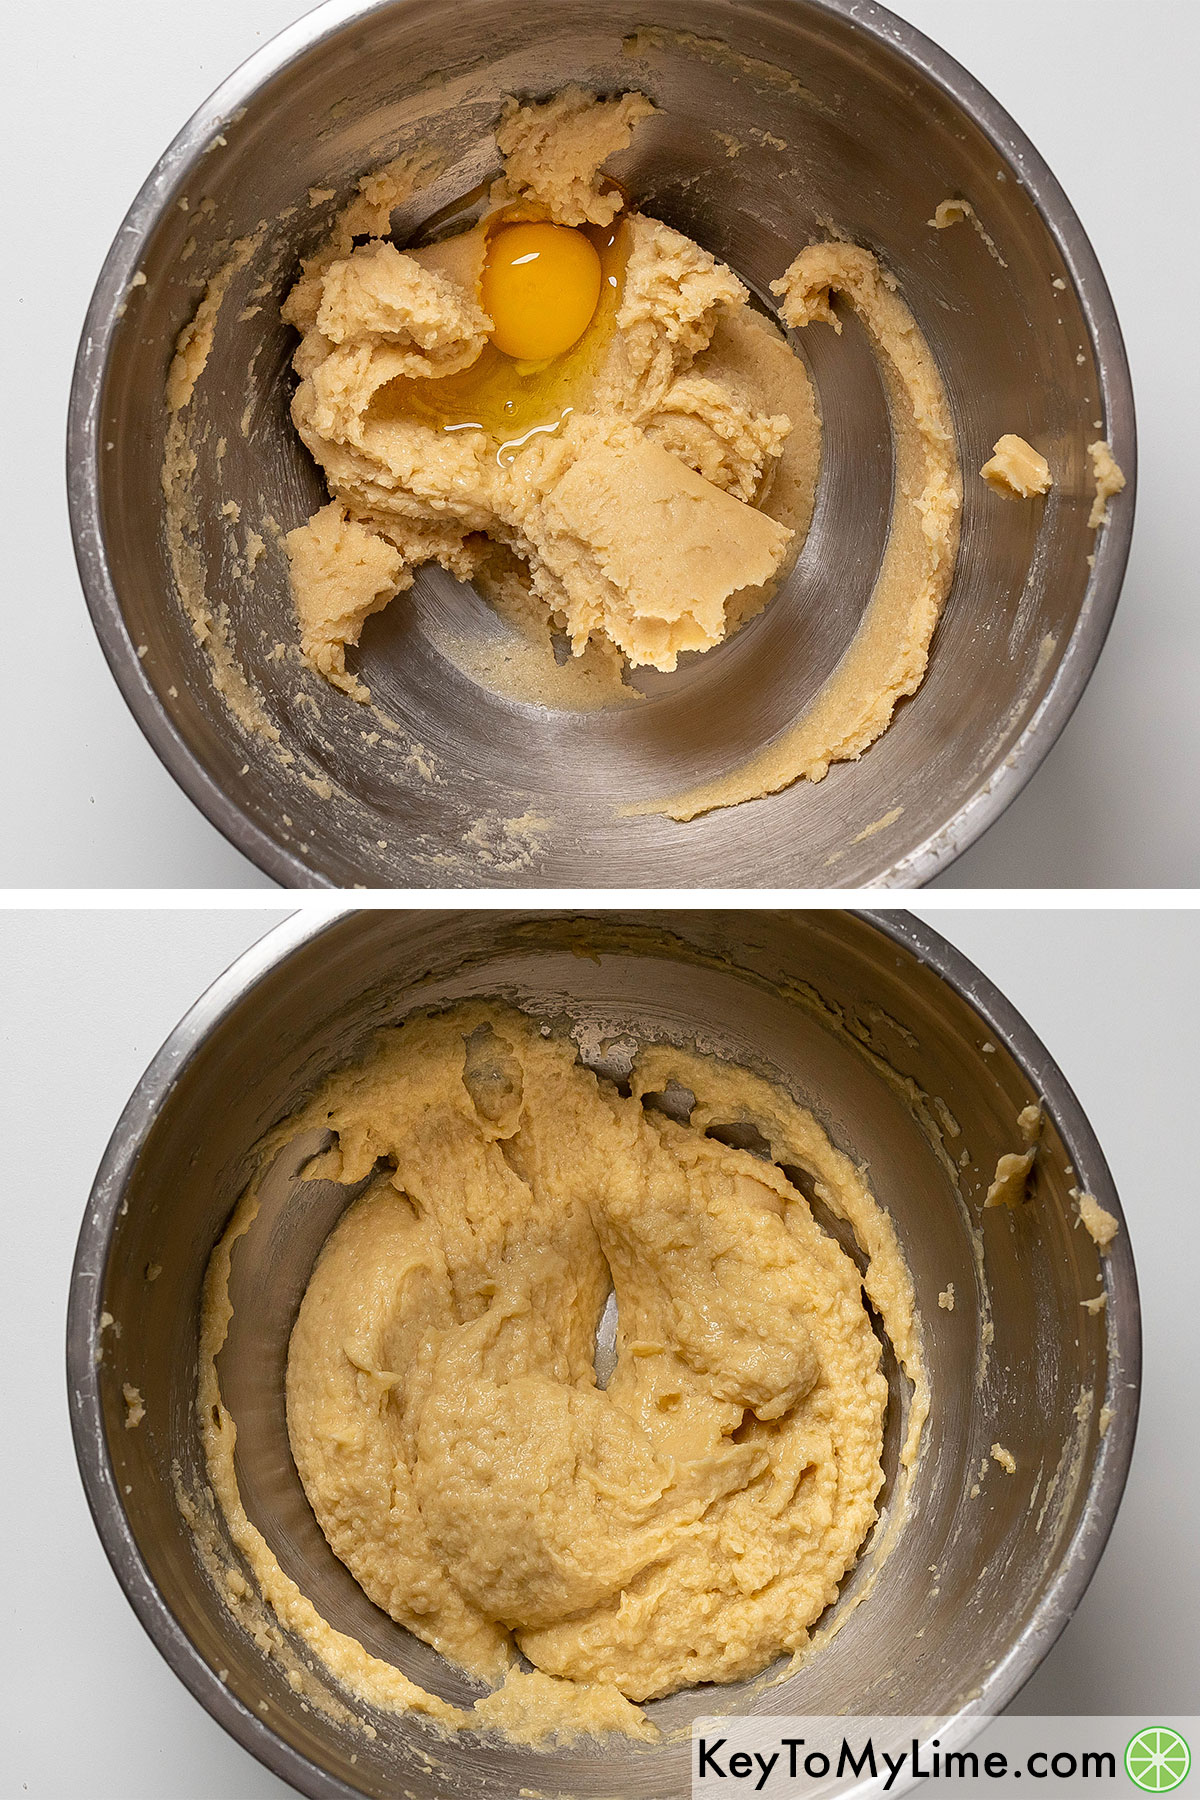 Beating butter and sugar in a large mixing bowl until light and fluffy then adding an egg.